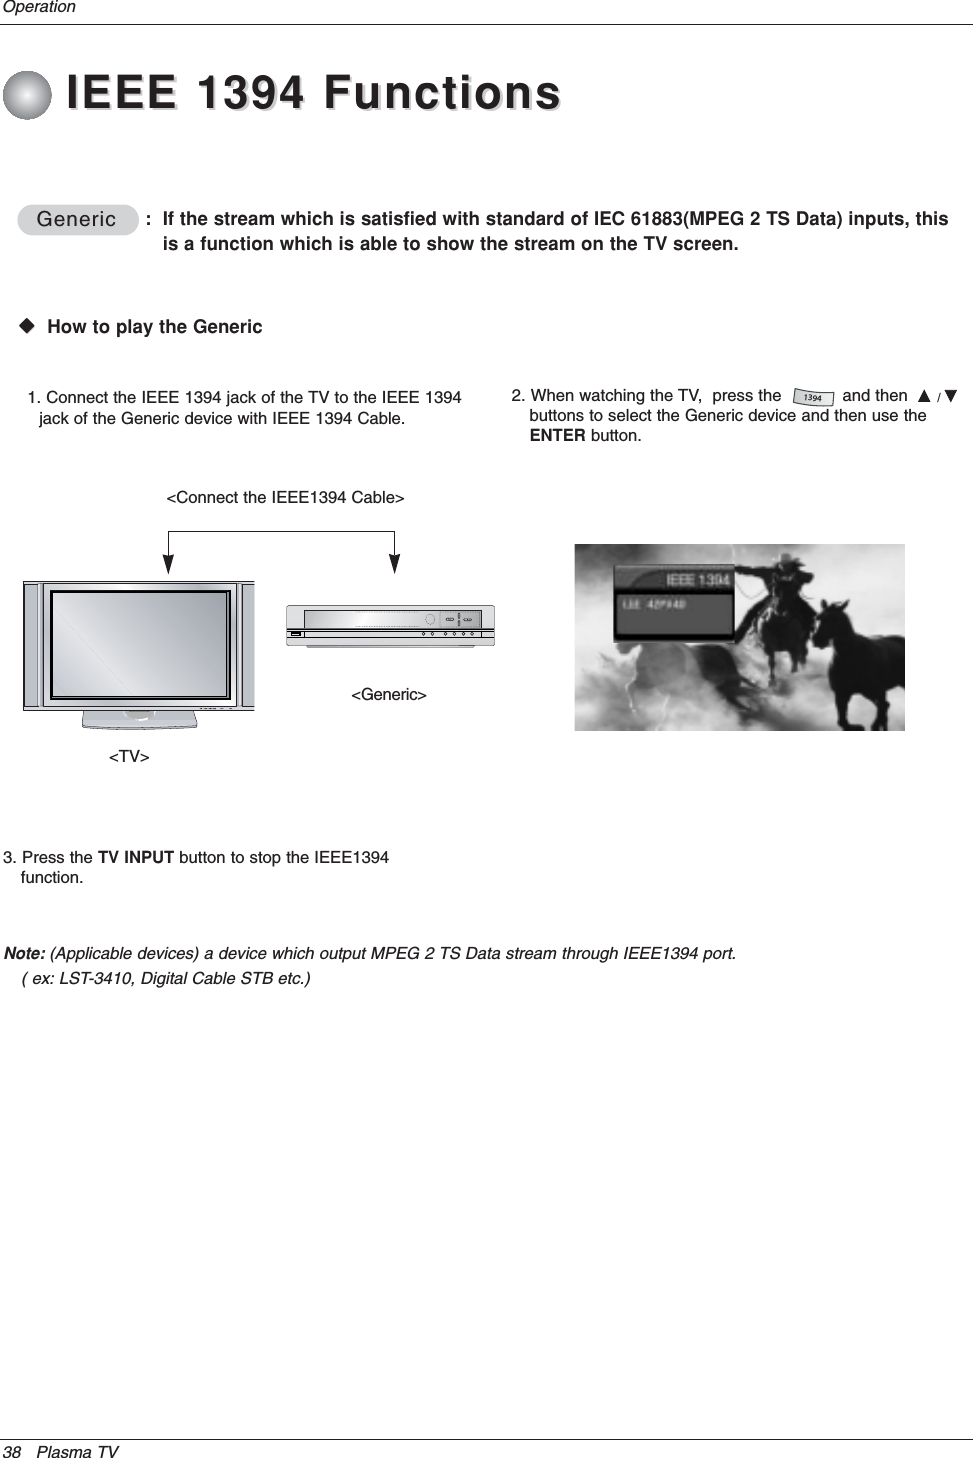 38 Plasma TVOperationGenericGenericWWVHow to play the Generic&lt;TV&gt;&lt;Generic&gt;1. Connect the IEEE 1394 jack of the TV to the IEEE 1394jack of the Generic device with IEEE 1394 Cable.:  If the stream which is satisfied with standard of IEC 61883(MPEG 2 TS Data) inputs, thisis a function which is able to show the stream on the TV screen.&lt;Connect the IEEE1394 Cable&gt;2. When watching the TV,  press the            and then  D/Ebuttons to select the Generic device and then use theENTER button.13943. Press the TV INPUT button to stop the IEEE1394function.Note: (Applicable devices) a device which output MPEG 2 TS Data stream through IEEE1394 port. ( ex: LST-3410, Digital Cable STB etc.)IEEE 1394 FunctionsIEEE 1394 Functions